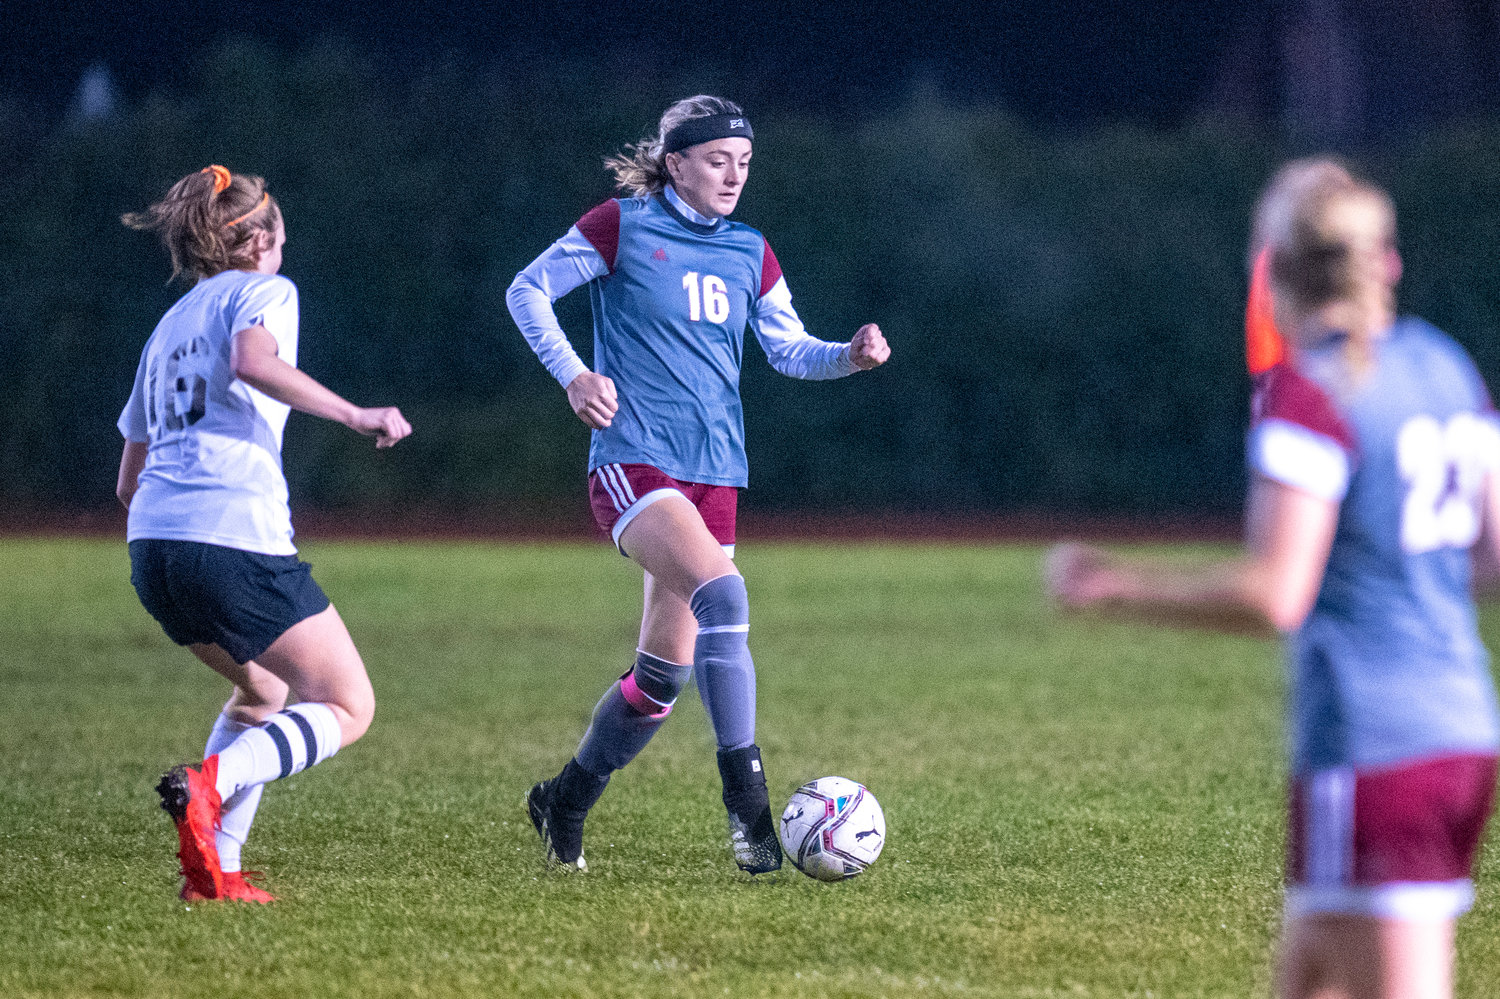 W.F. West defender Kaylynne Dowling (16) clears a ball against Washougal in a district playoff match at home Tuesday, Nov. 2